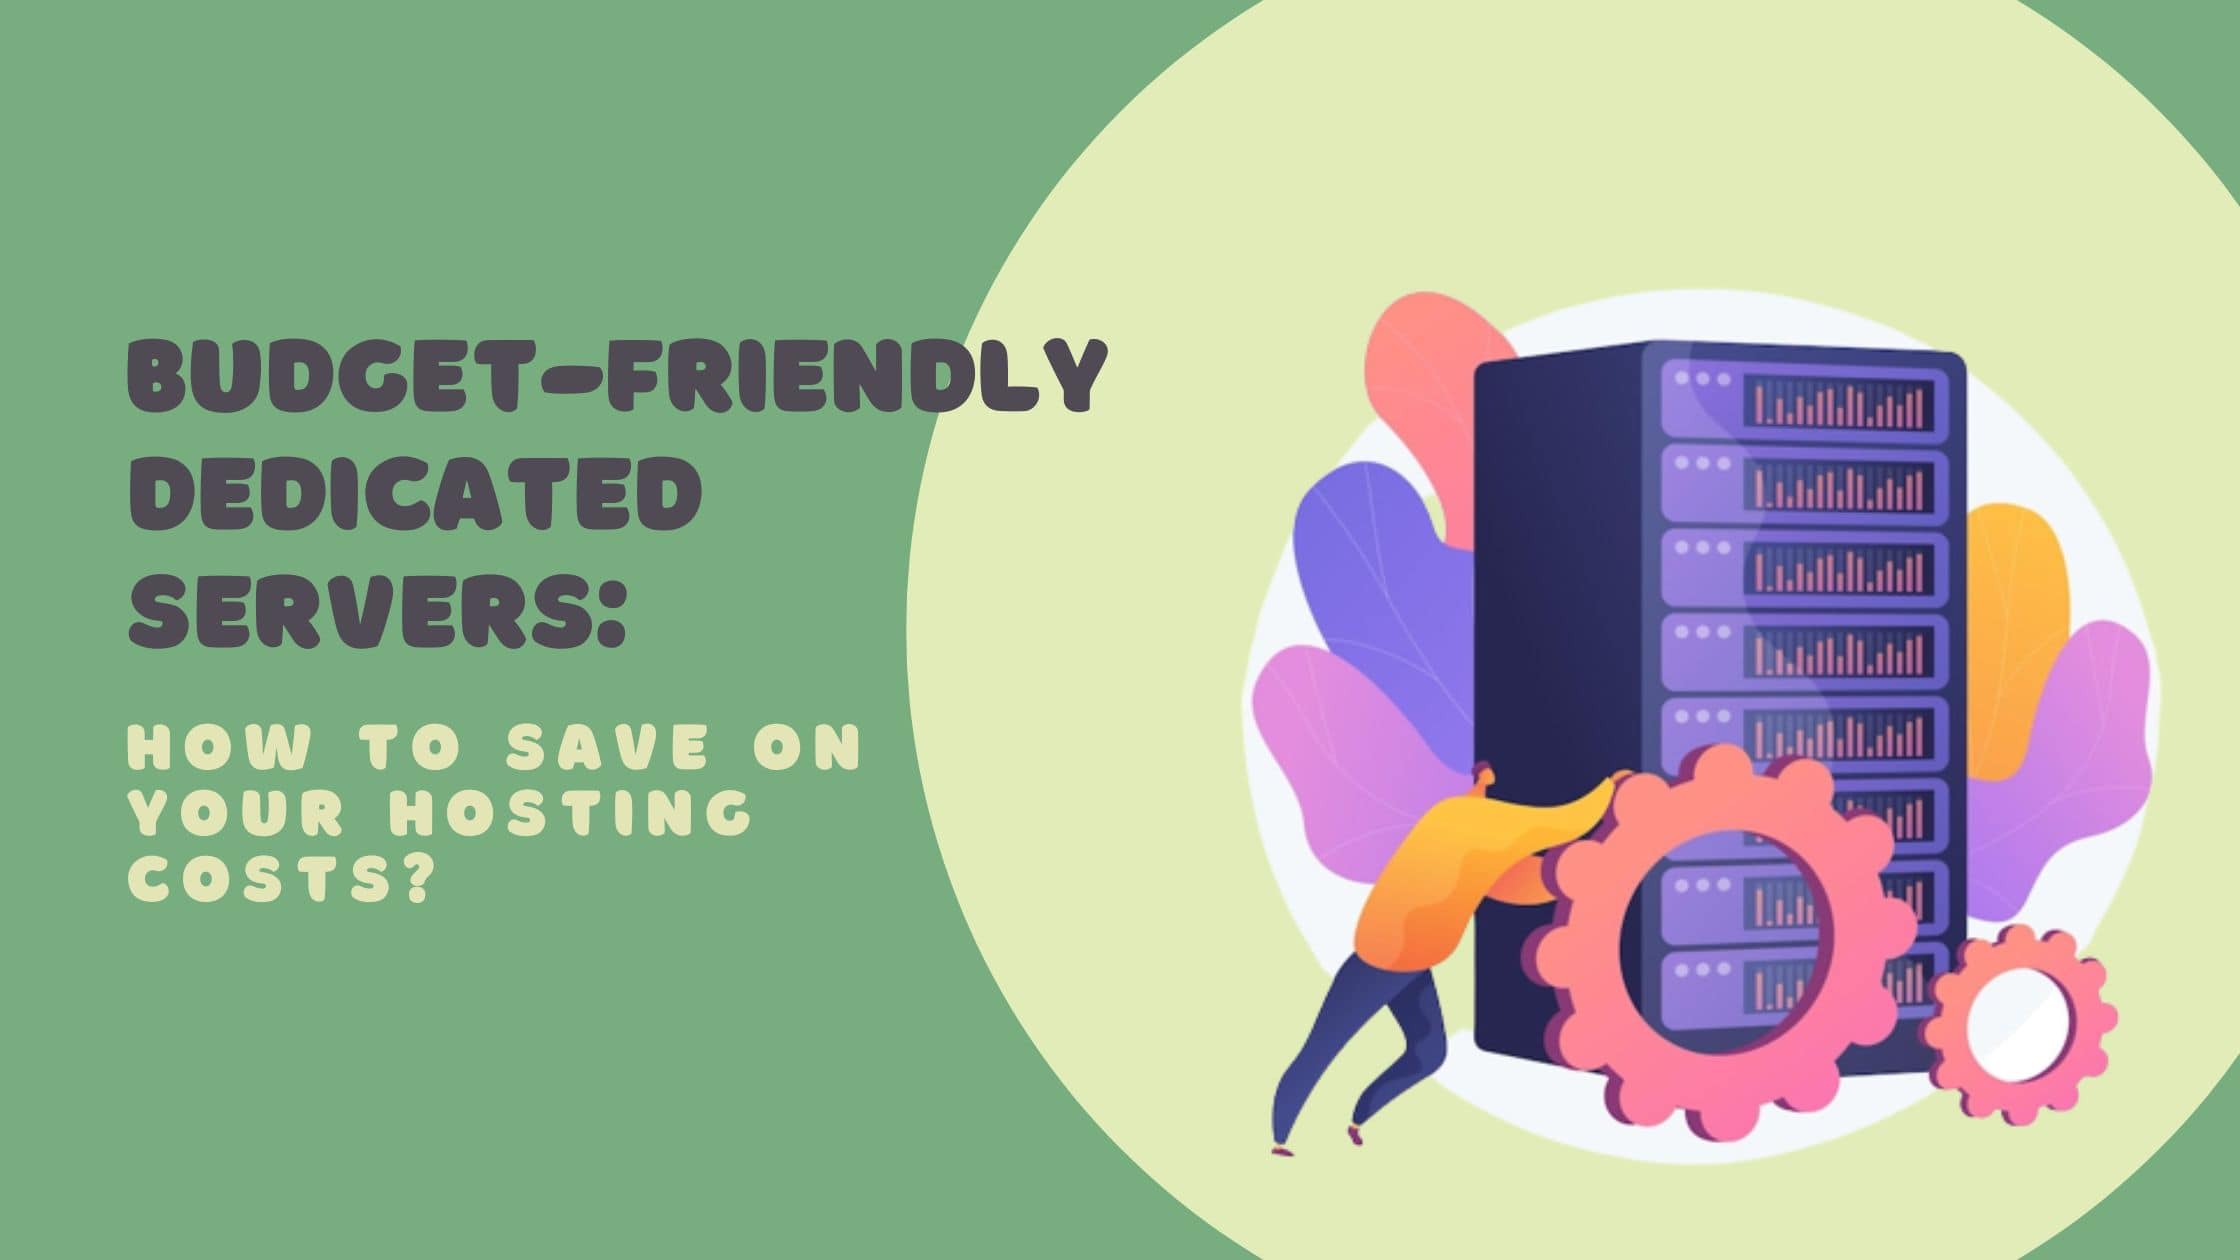 Budget-friendly dedicated servers How to save on your hosting costs?